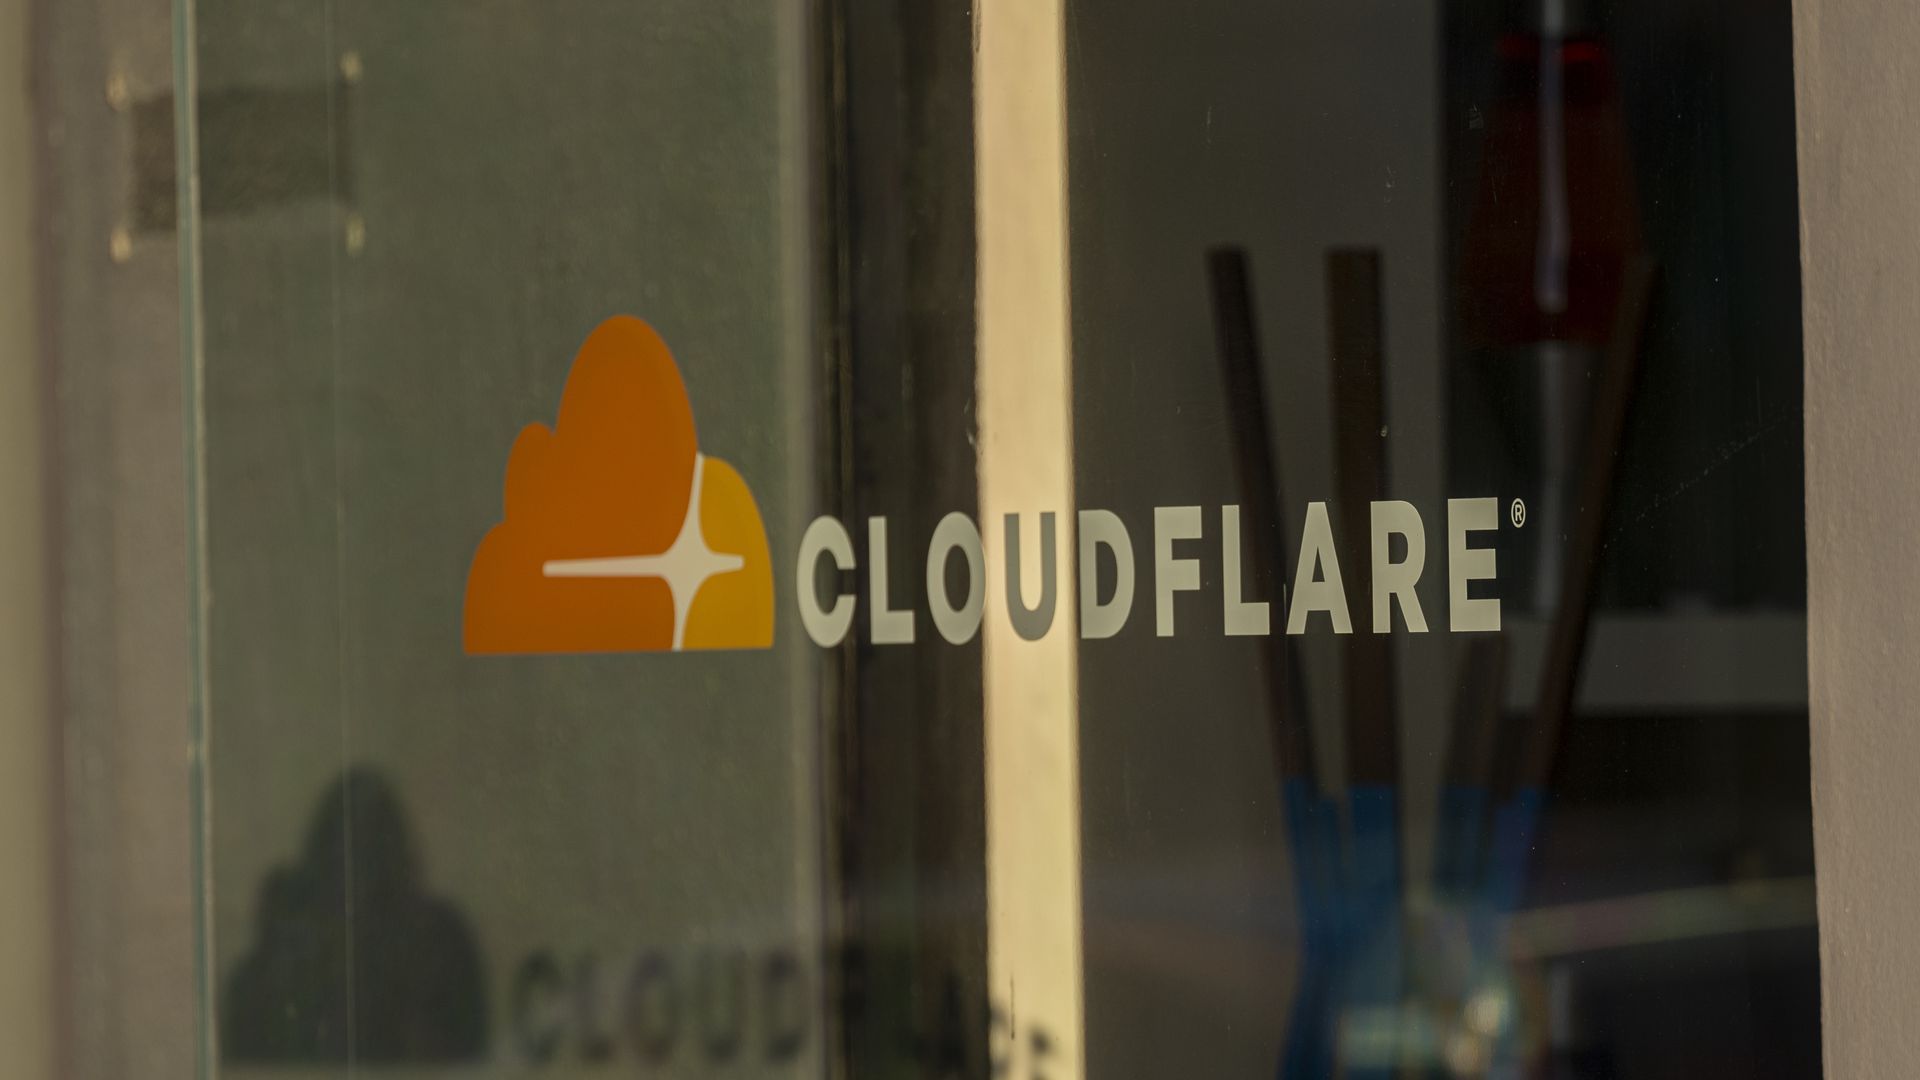 The Cloudflare logo on an office window